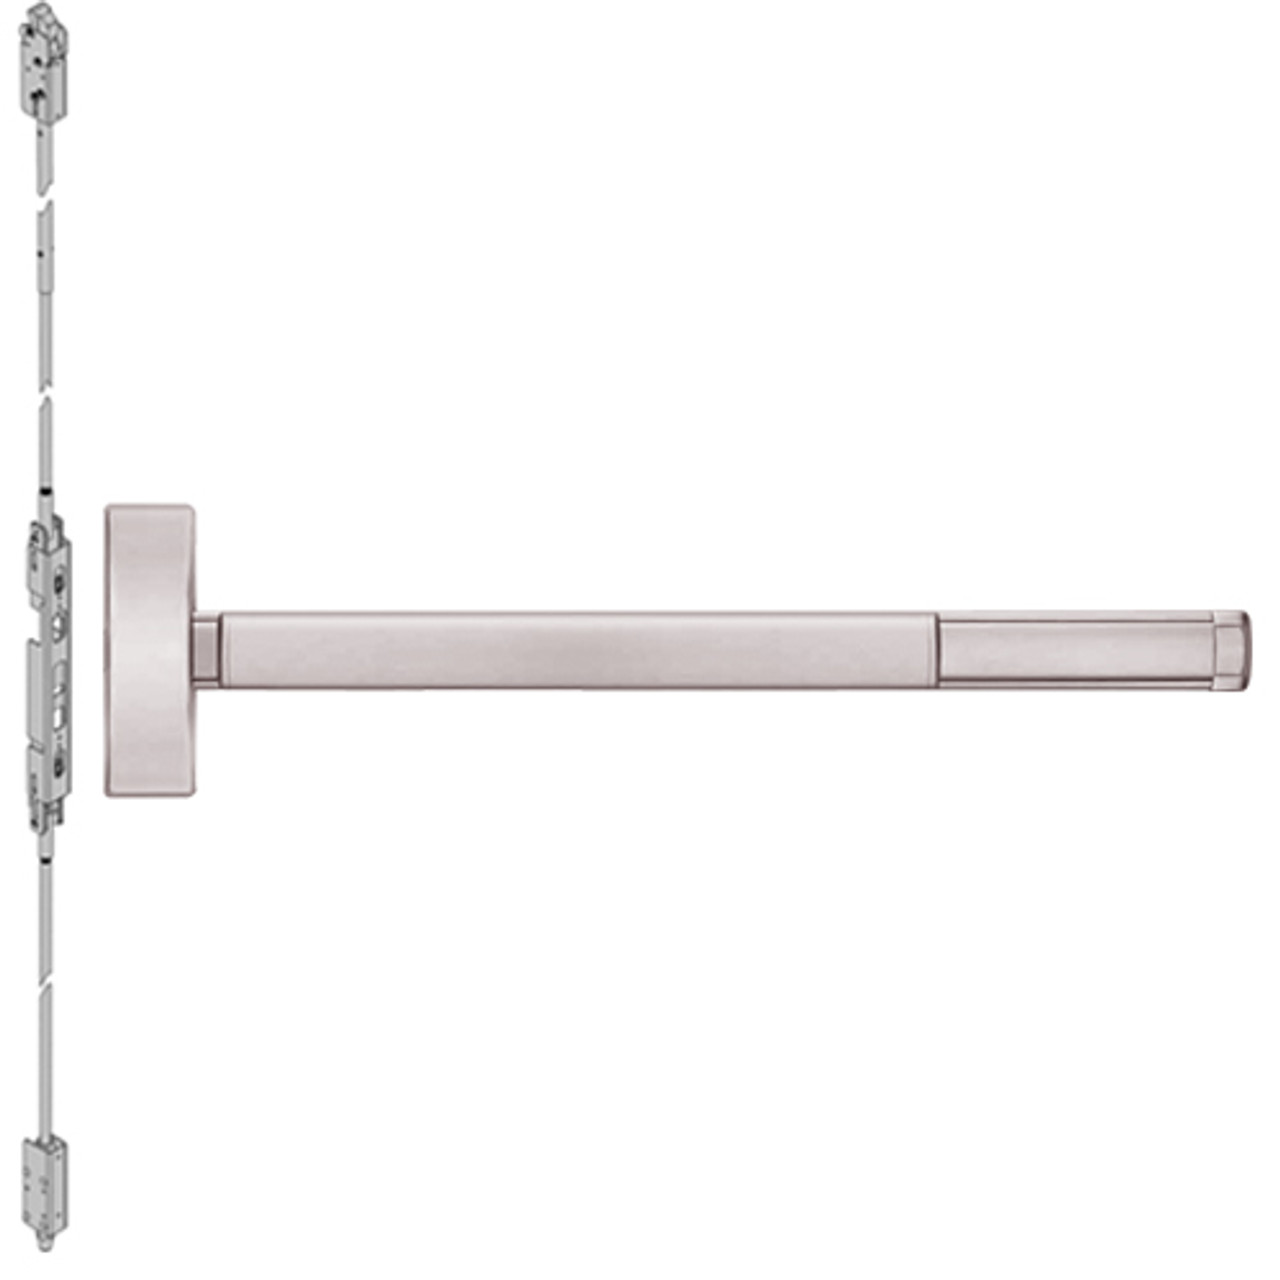 MLRFL2805-628-48 PHI 2800 Series Fire Rated Concealed Vertical Rod Exit Device with Motorized Latch Retraction Prepped for Key Controls Thumb Piece in Satin Aluminum Finish